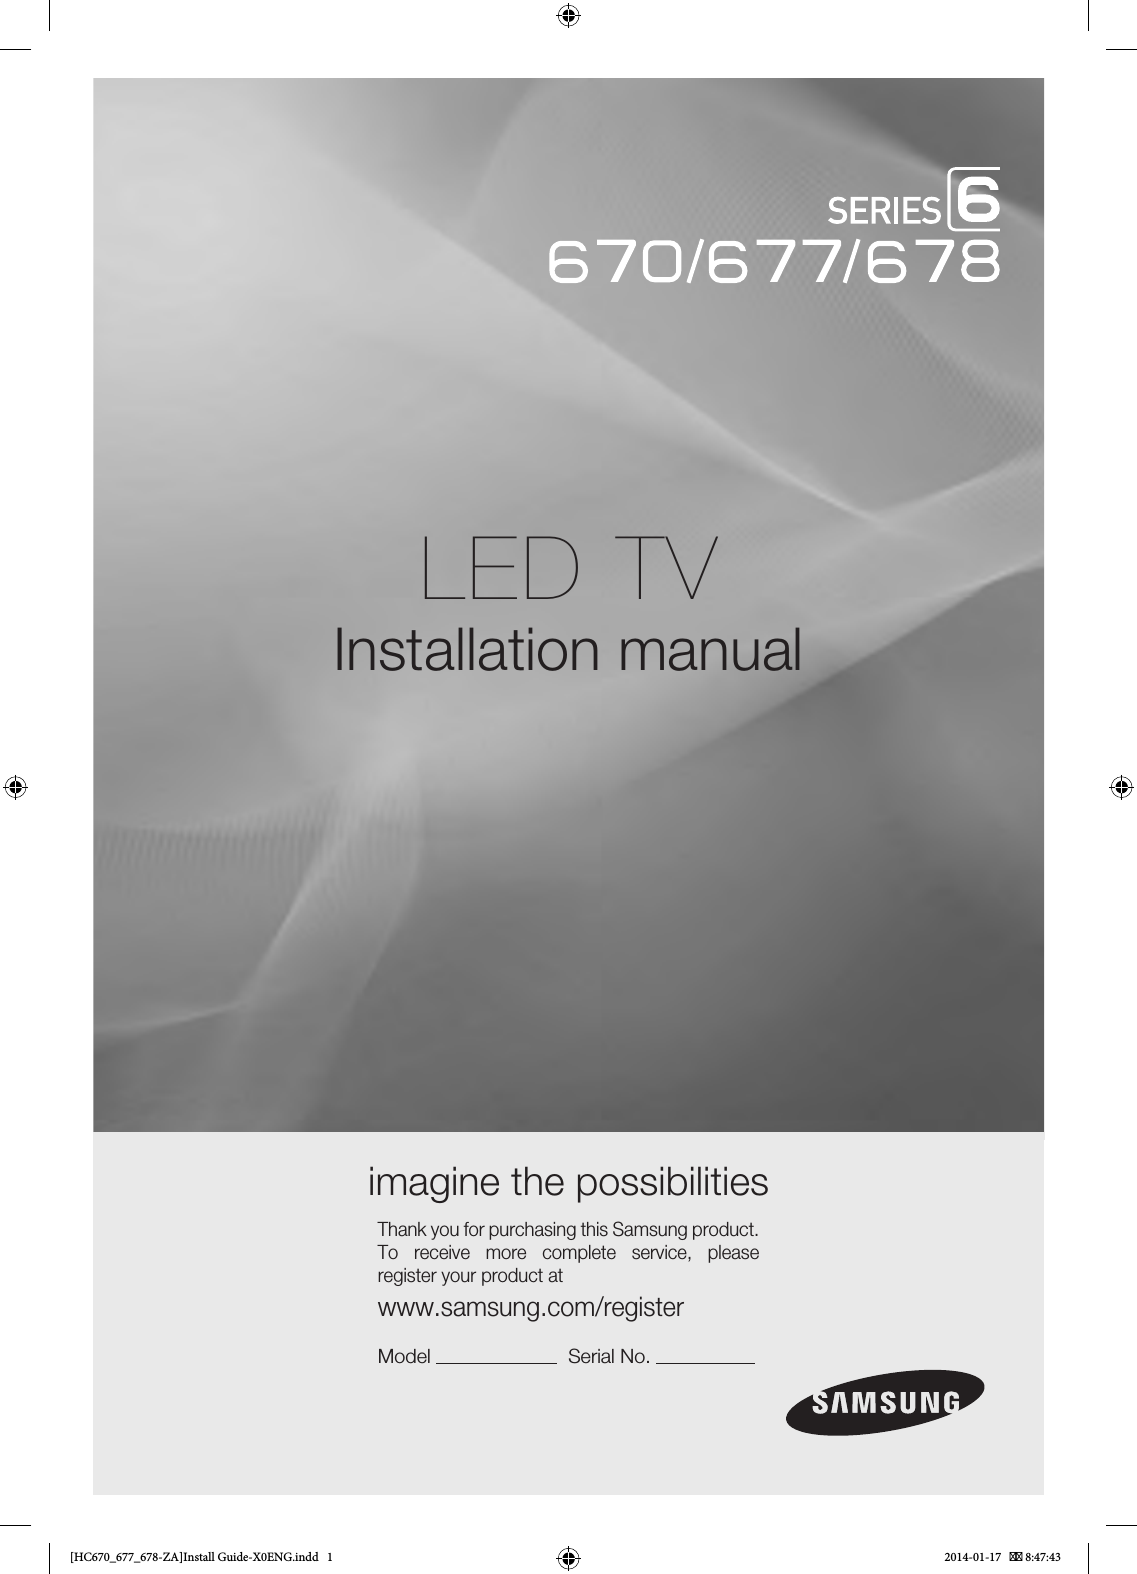 LED TVInstallation manual imagine the possibilitiesThank you for purchasing this Samsung product. To receive more complete service, please register your product atwww.samsung.com/registerModel                         Serial No.                       [HC670_677_678-ZA]Install Guide-X0ENG.indd   1 2014-01-17    8:47:43